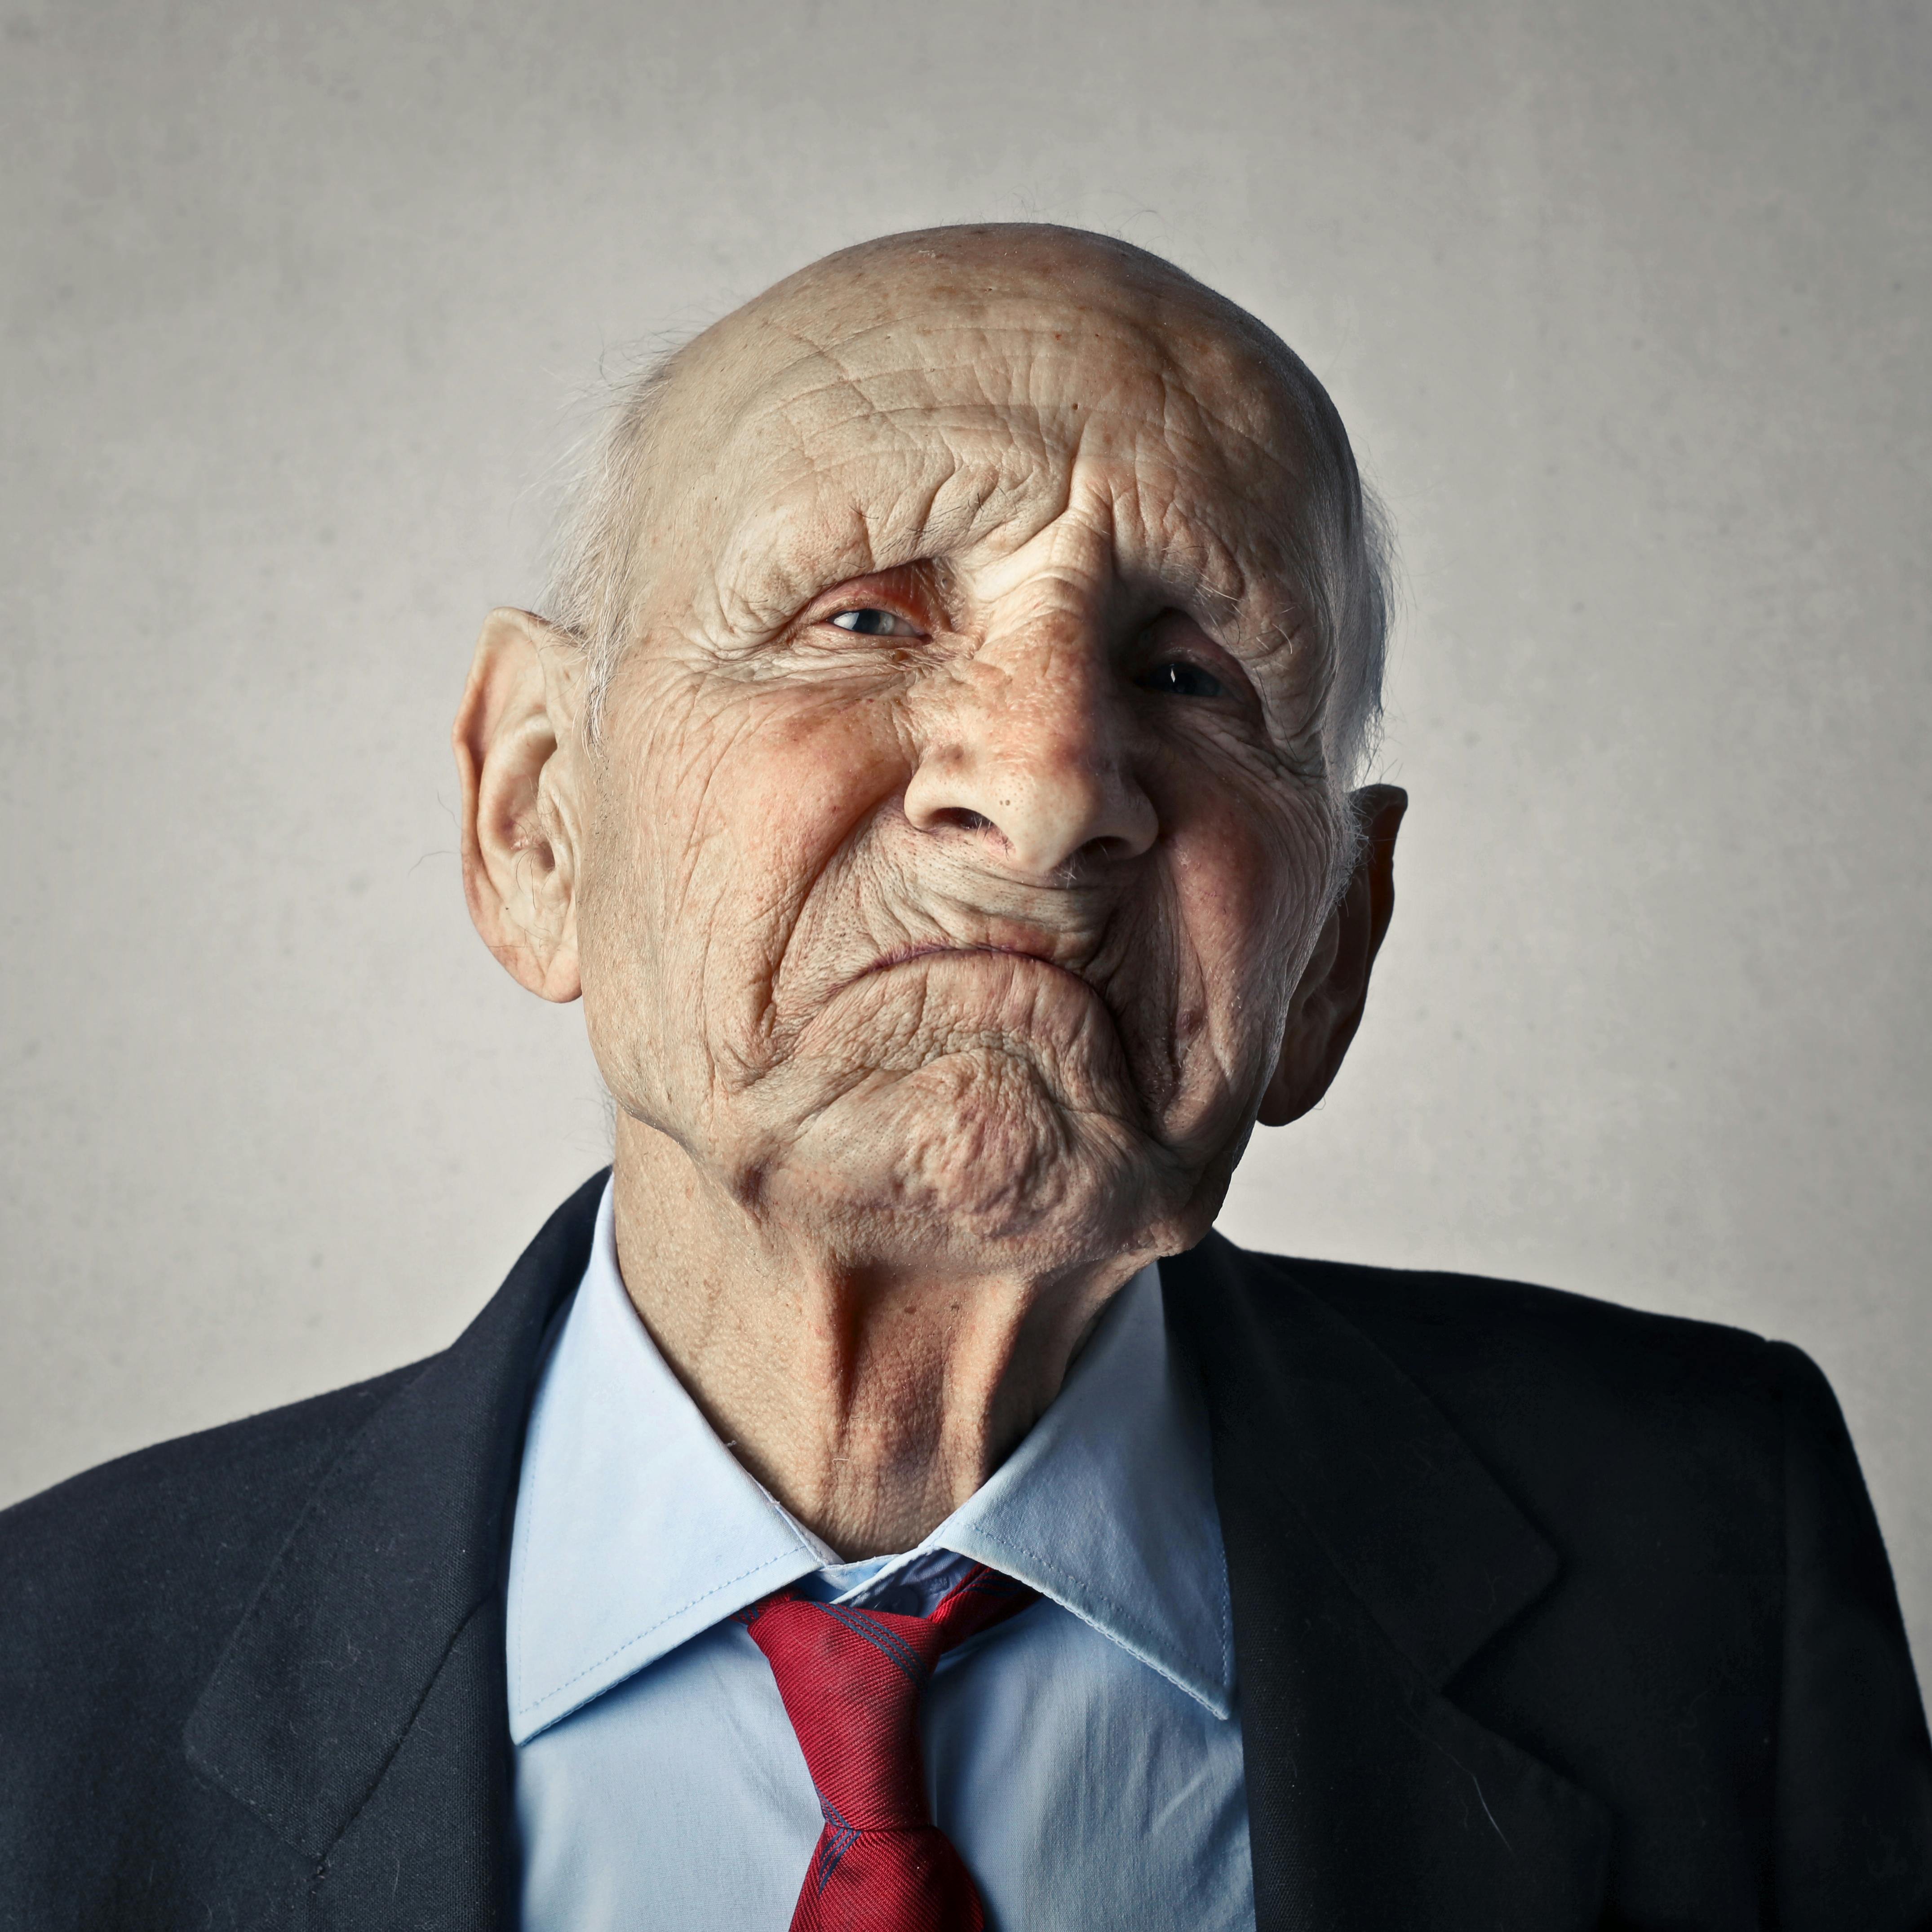 Unhappy old man | Source: Pexels